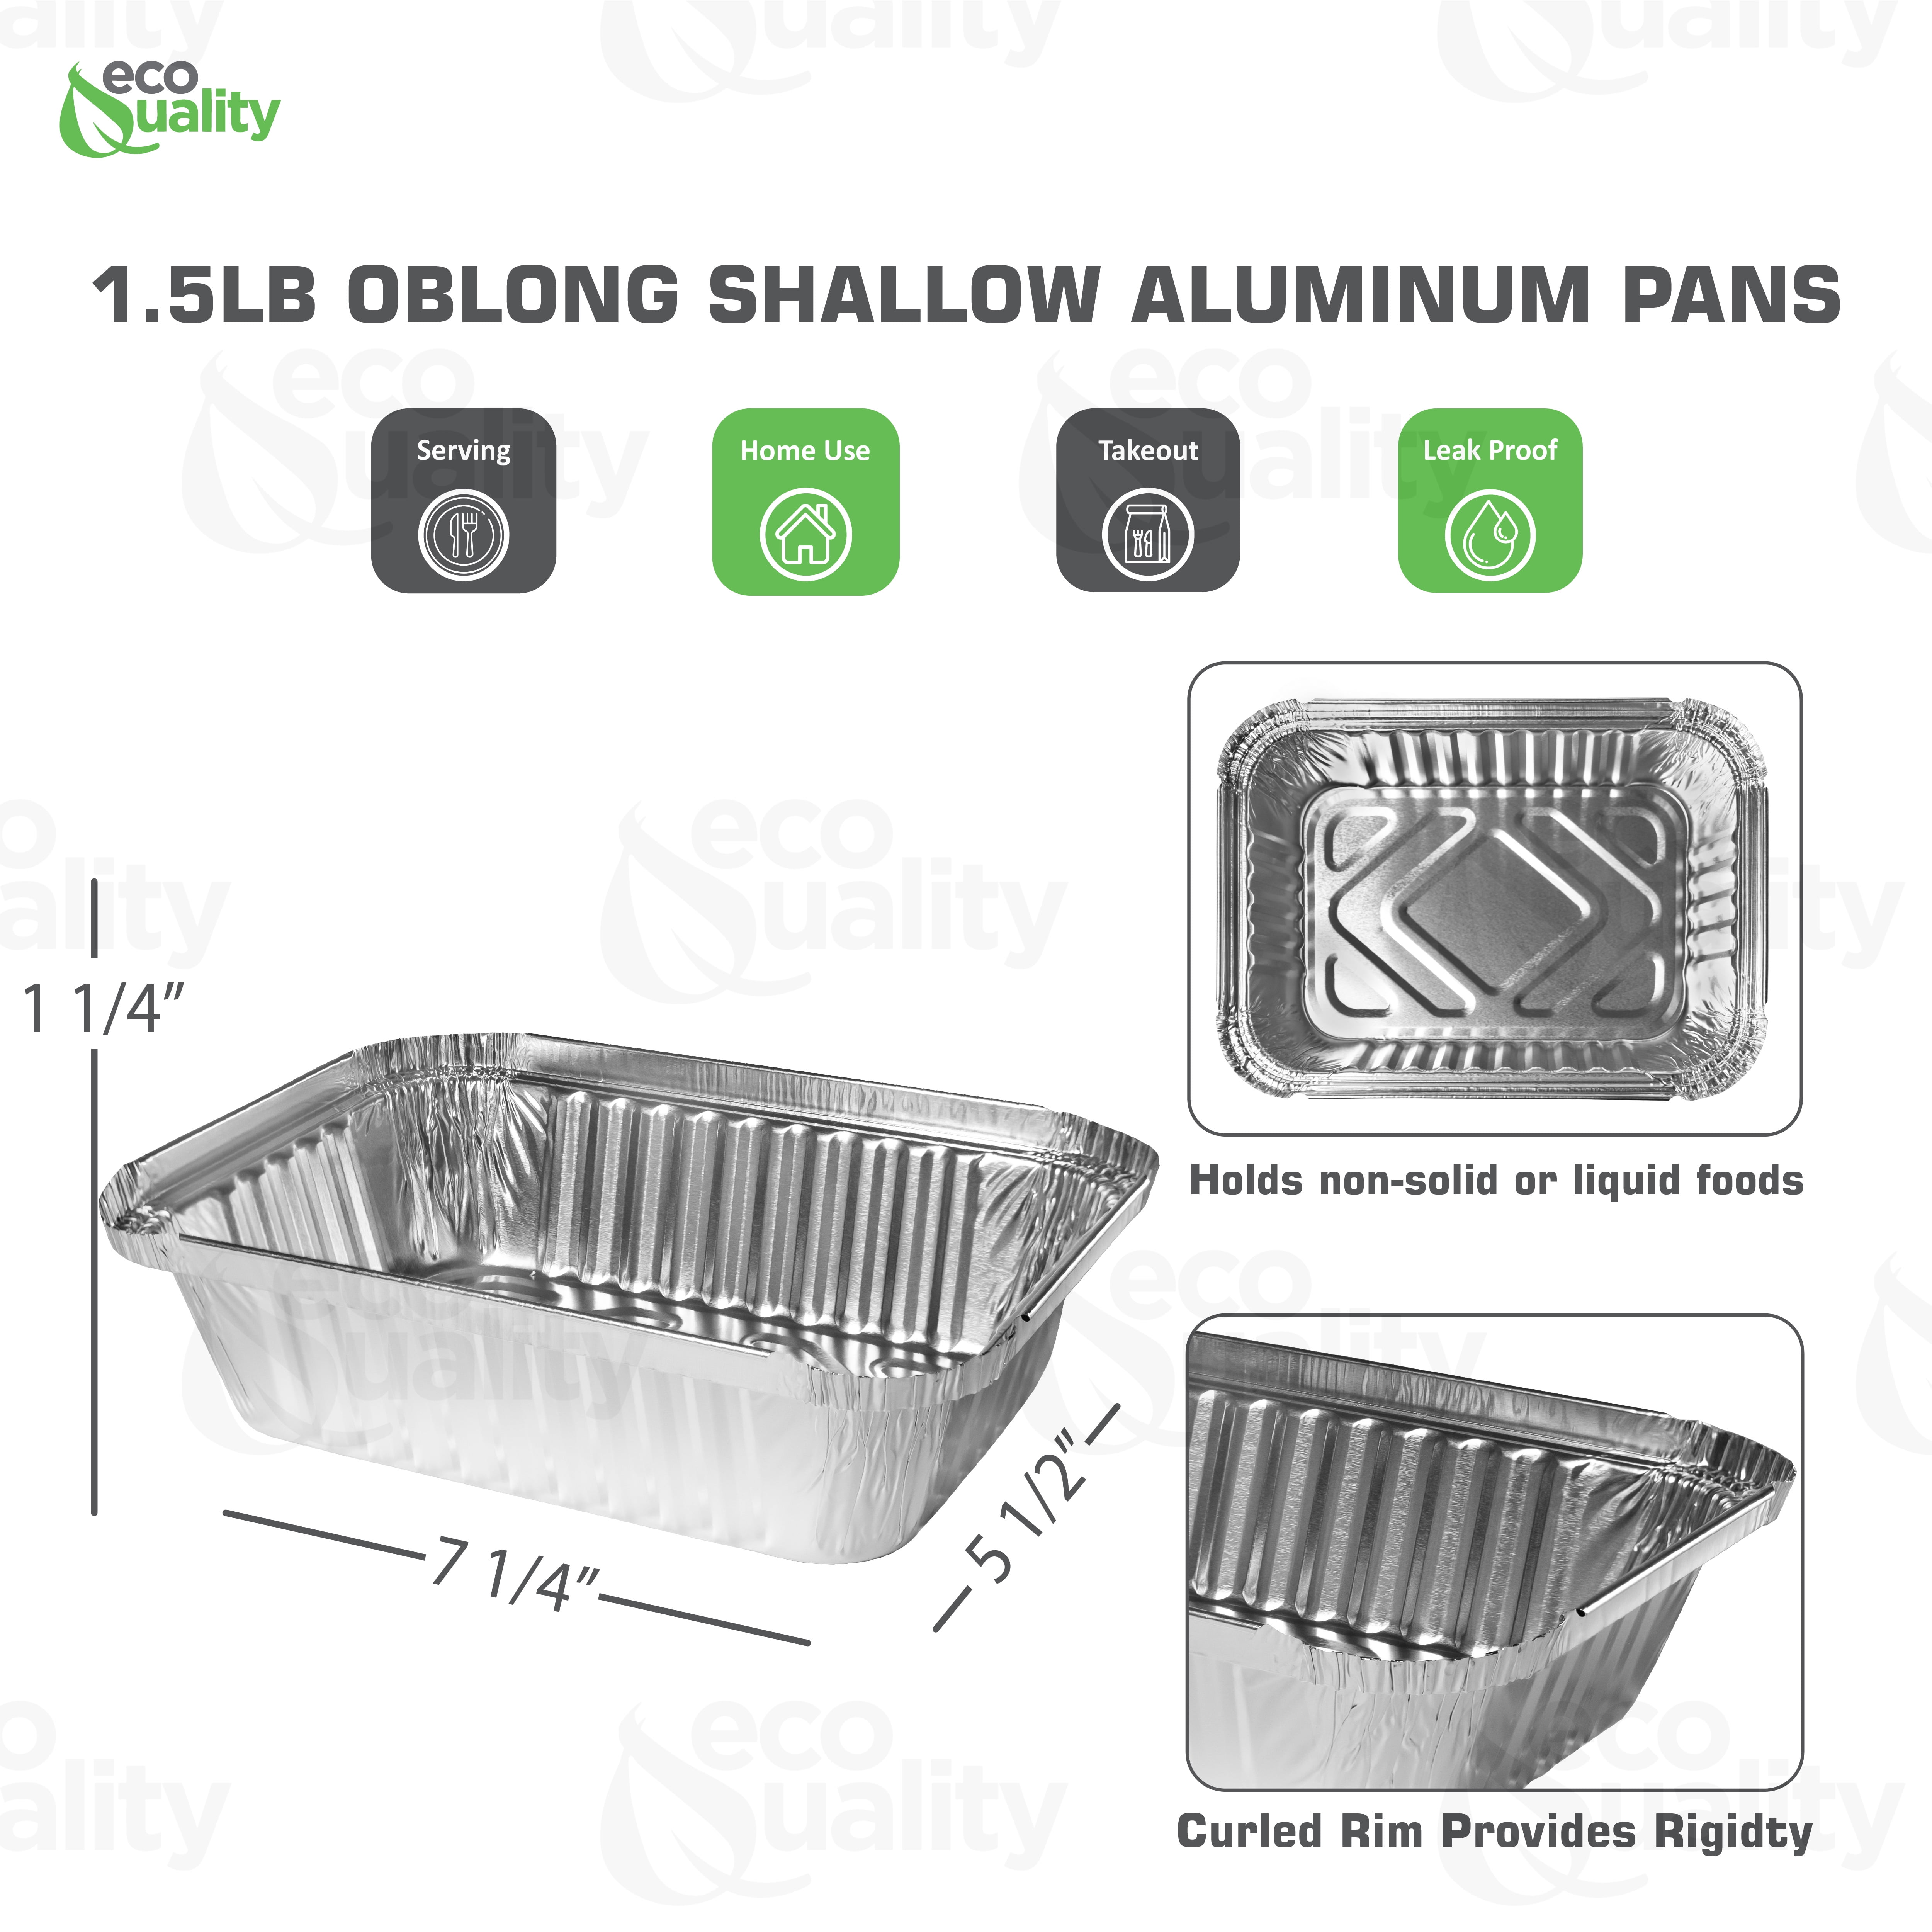 EcoQuality [30 Pack] Heavy Duty Full Size Shallow Aluminum Pans with Lids Foil Roasting & Steam Table Pan 21x13 inch Shallow Chafing Trays for Catering